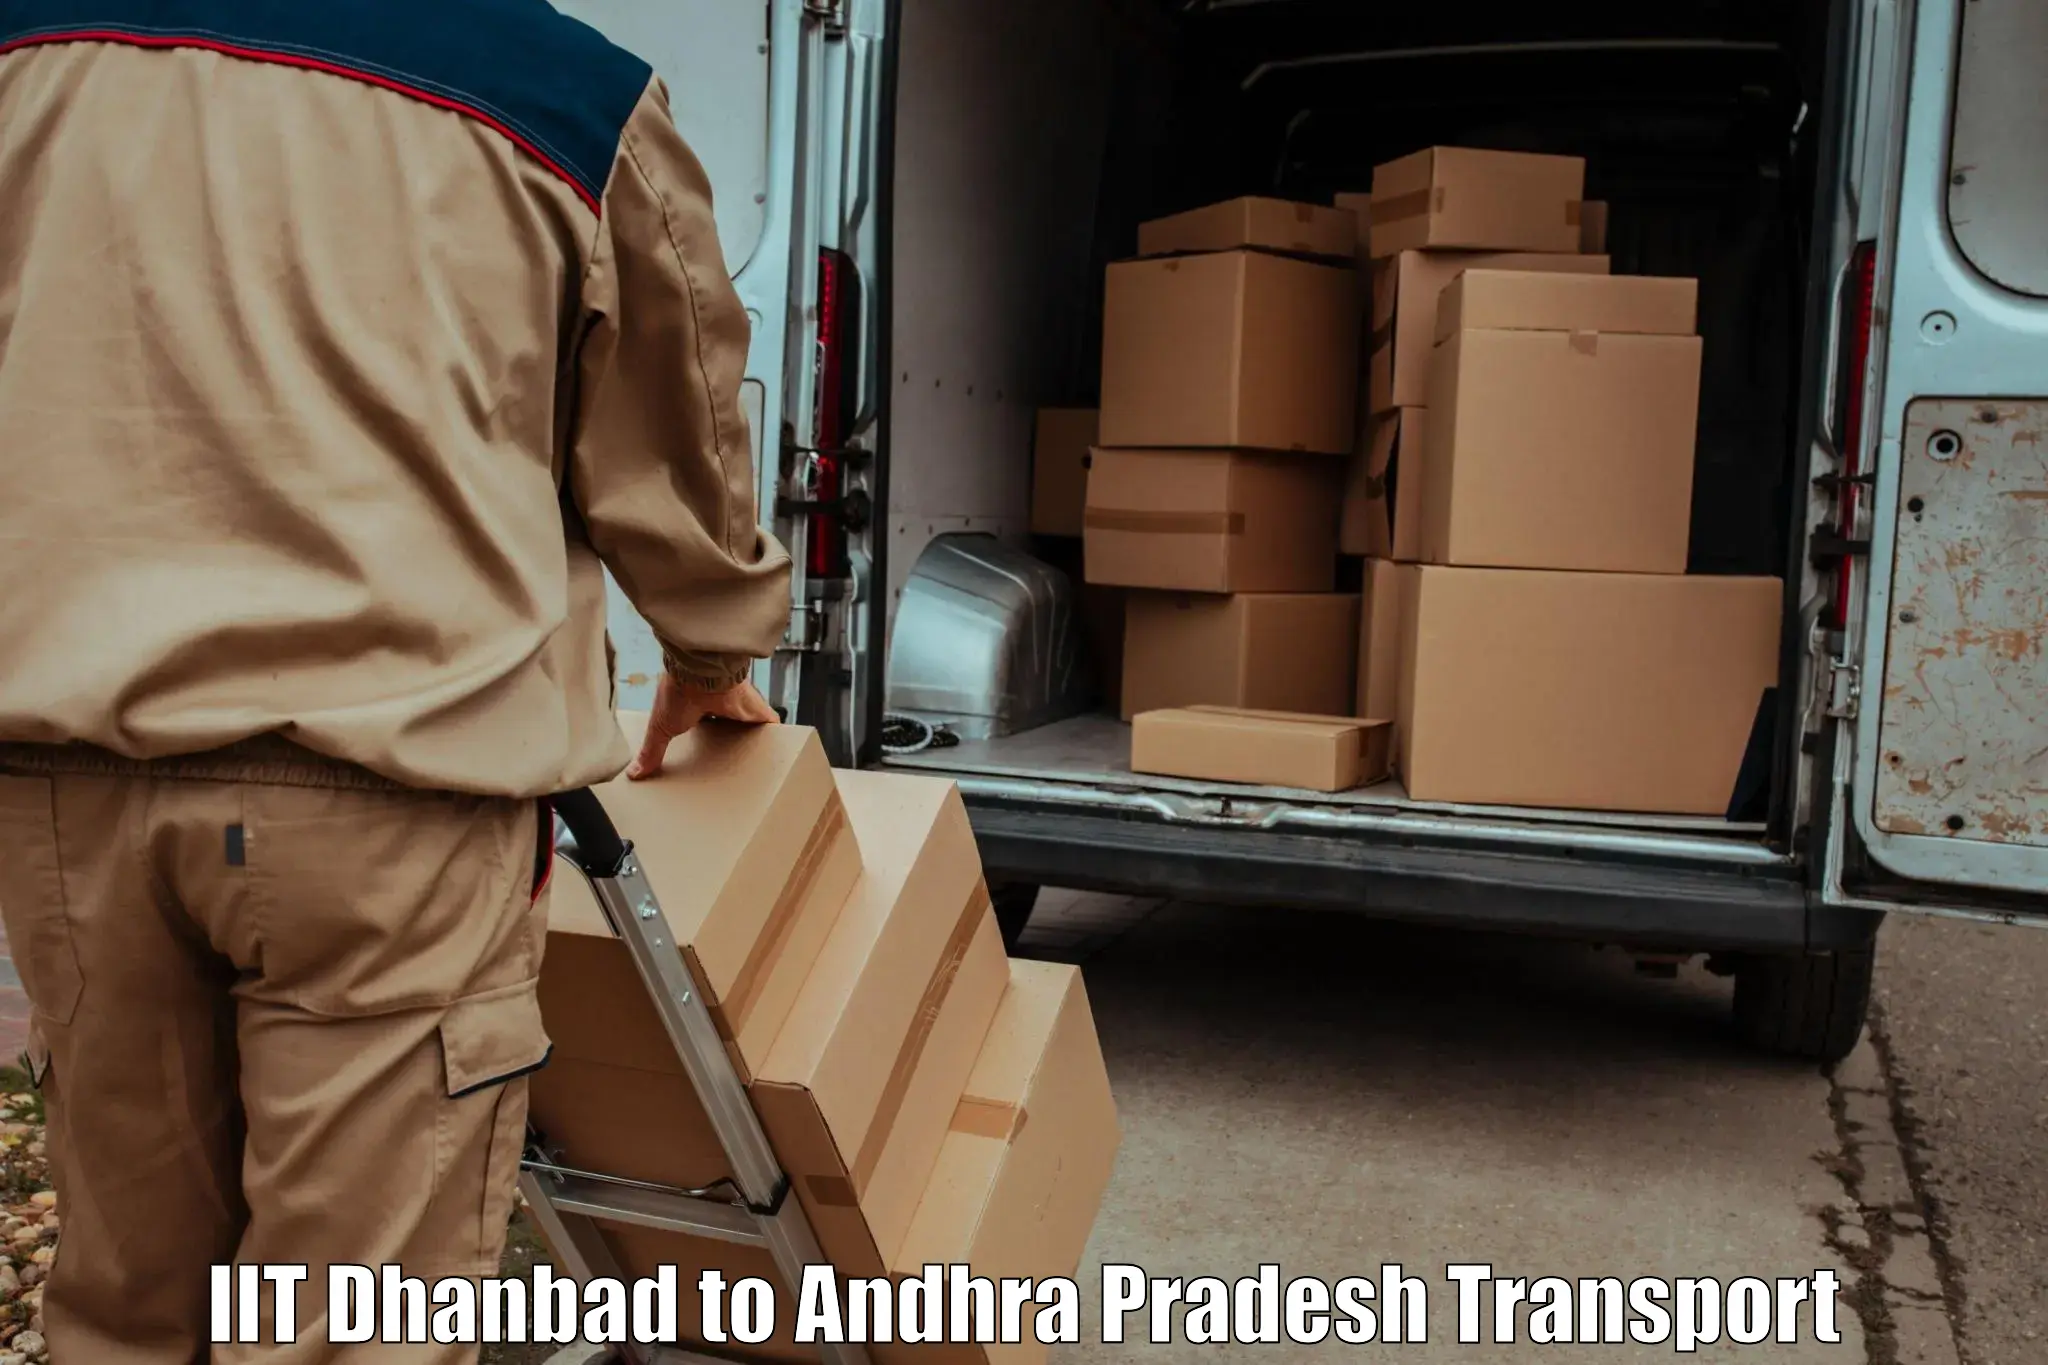 Express transport services IIT Dhanbad to Visakhapatnam Port